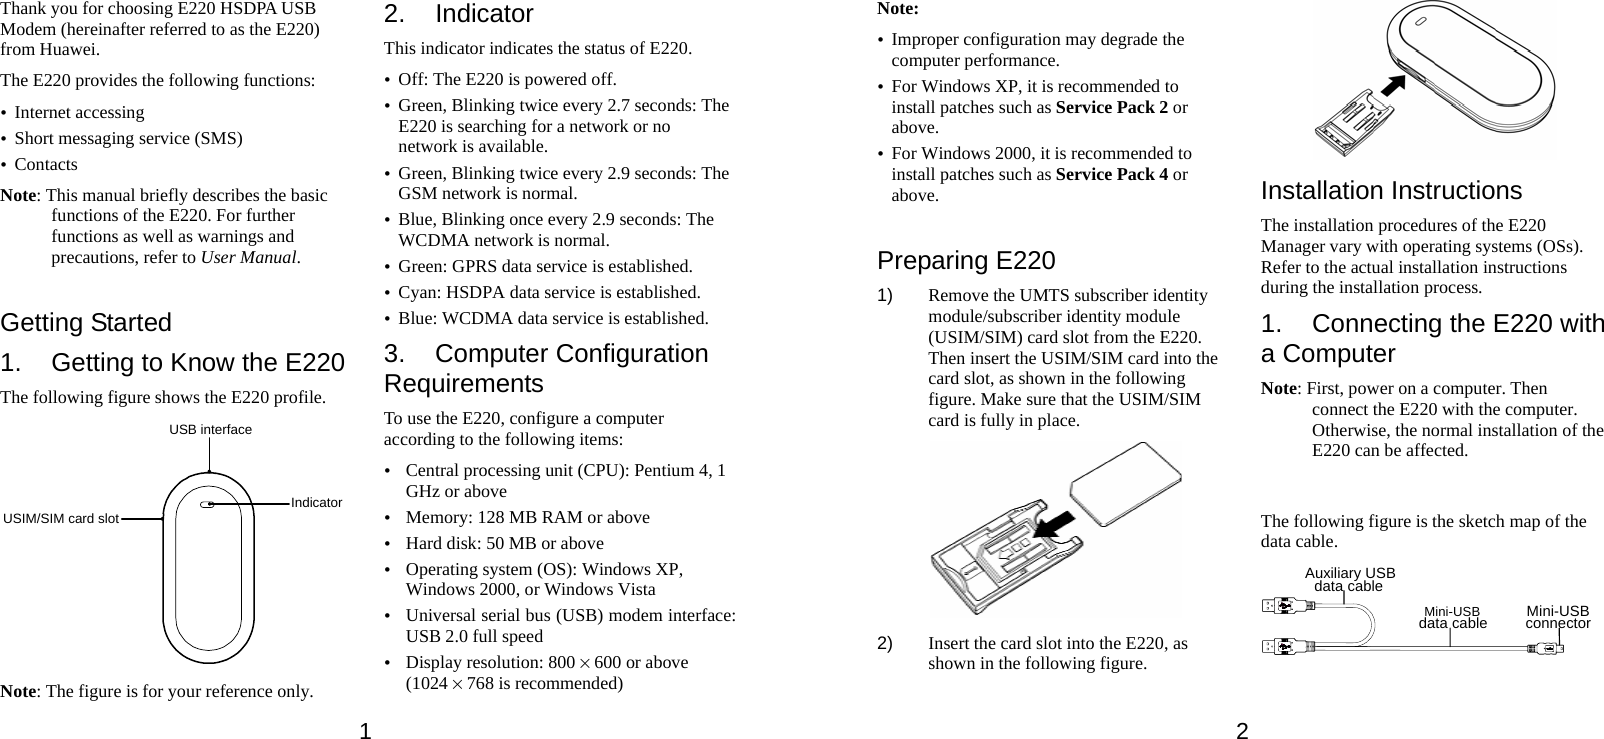 1 Thank you for choosing E220 HSDPA USB Modem (hereinafter referred to as the E220) from Huawei. The E220 provides the following functions: y Internet accessing y Short messaging service (SMS) y Contacts Note: This manual briefly describes the basic functions of the E220. For further functions as well as warnings and precautions, refer to User Manual.  Getting Started 1.  Getting to Know the E220 The following figure shows the E220 profile. USB interfaceUSIM/SIM card slot Indicator Note: The figure is for your reference only. 2. Indicator This indicator indicates the status of E220. y Off: The E220 is powered off. y Green, Blinking twice every 2.7 seconds: The E220 is searching for a network or no network is available. y Green, Blinking twice every 2.9 seconds: The GSM network is normal. y Blue, Blinking once every 2.9 seconds: The WCDMA network is normal. y Green: GPRS data service is established. y Cyan: HSDPA data service is established. y Blue: WCDMA data service is established. 3. Computer Configuration Requirements To use the E220, configure a computer according to the following items: y Central processing unit (CPU): Pentium 4, 1 GHz or above y Memory: 128 MB RAM or above y Hard disk: 50 MB or above y Operating system (OS): Windows XP, Windows 2000, or Windows Vista y Universal serial bus (USB) modem interface: USB 2.0 full speed y Display resolution: 800 % 600 or above (1024 % 768 is recommended) 2 Note: y Improper configuration may degrade the computer performance.   y For Windows XP, it is recommended to install patches such as Service Pack 2 or above. y For Windows 2000, it is recommended to install patches such as Service Pack 4 or above.  Preparing E220 1)  Remove the UMTS subscriber identity module/subscriber identity module (USIM/SIM) card slot from the E220. Then insert the USIM/SIM card into the card slot, as shown in the following figure. Make sure that the USIM/SIM card is fully in place.    2)  Insert the card slot into the E220, as shown in the following figure.  Installation Instructions The installation procedures of the E220 Manager vary with operating systems (OSs). Refer to the actual installation instructions during the installation process. 1.  Connecting the E220 with a Computer Note: First, power on a computer. Then connect the E220 with the computer. Otherwise, the normal installation of the E220 can be affected.  The following figure is the sketch map of the data cable. Auxiliary USBdata cableMini-USBdata cable Mini-USBconnector  